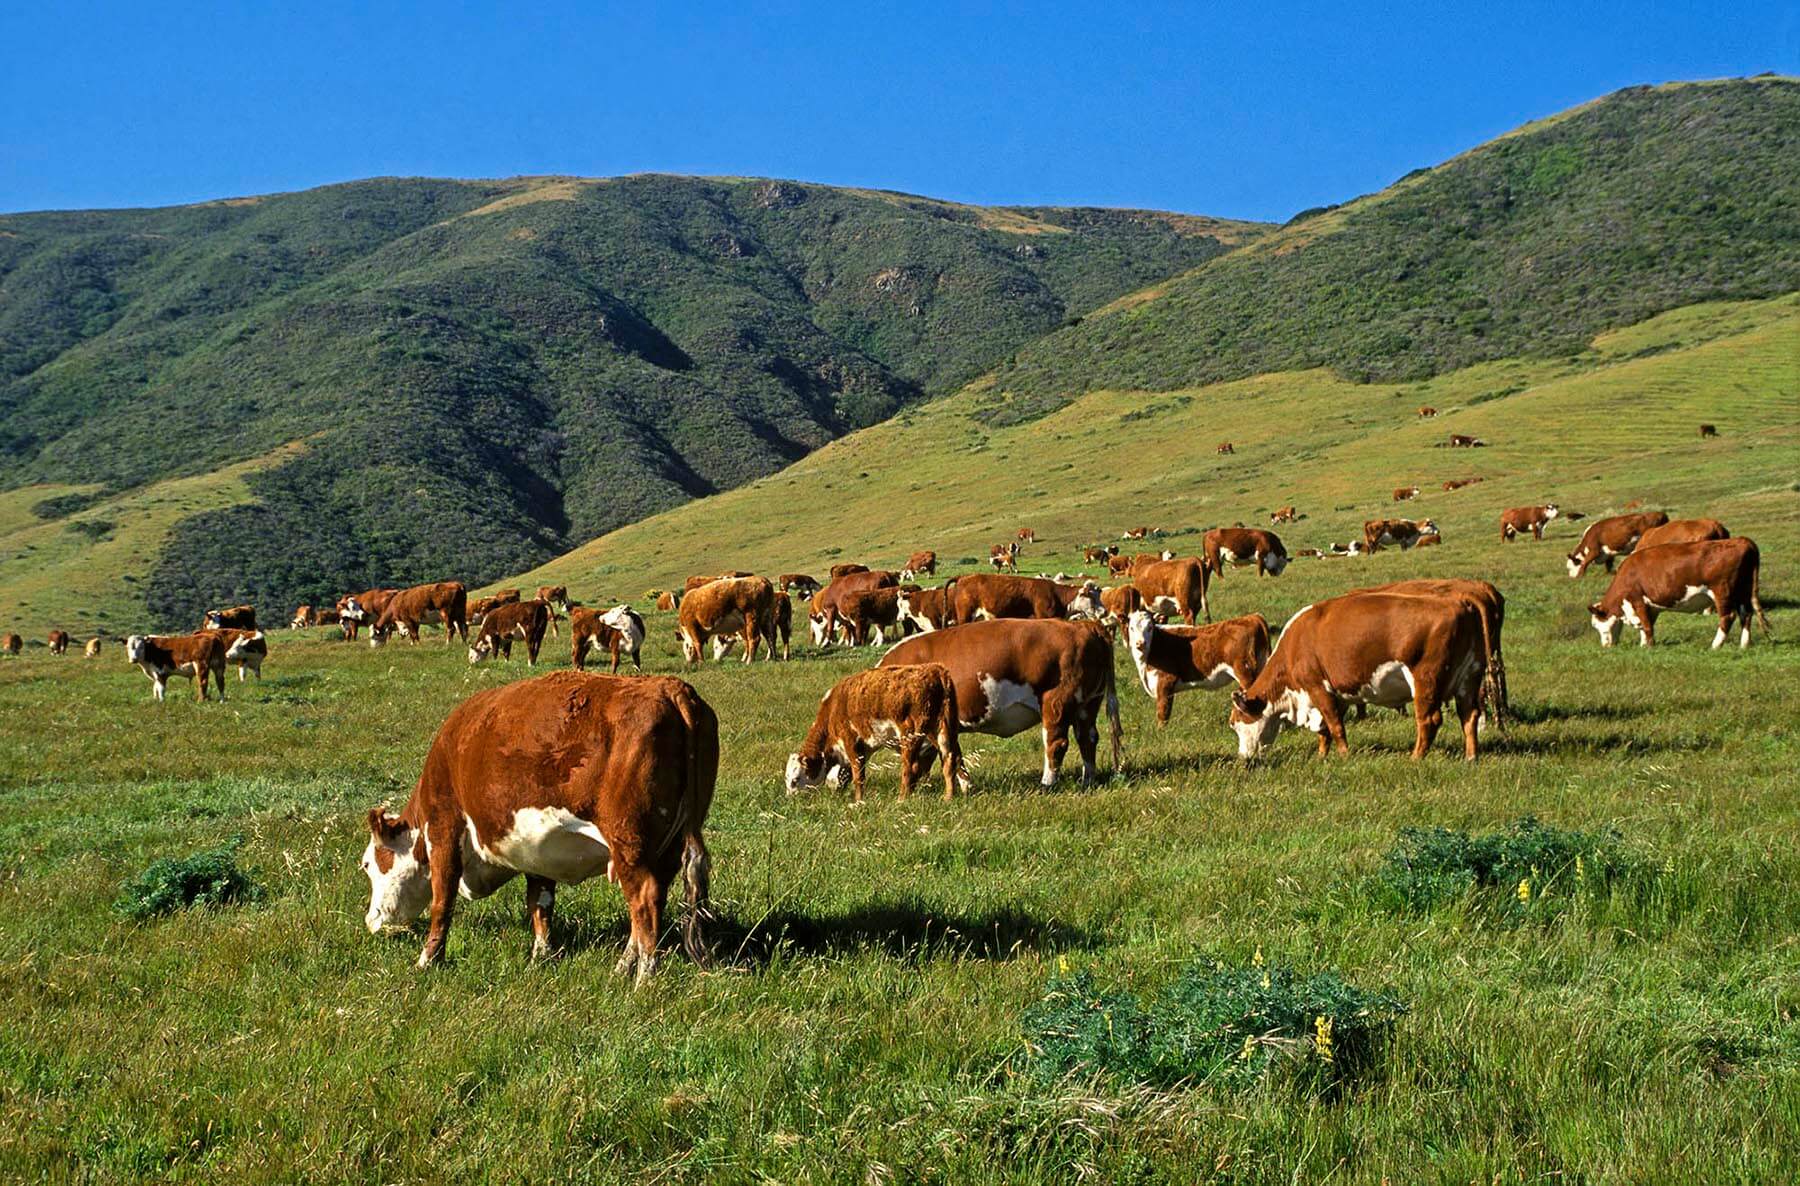 Hereford cows and calves grazing on the hills in Big Sur California. - Livestock photography by Craig Lovell